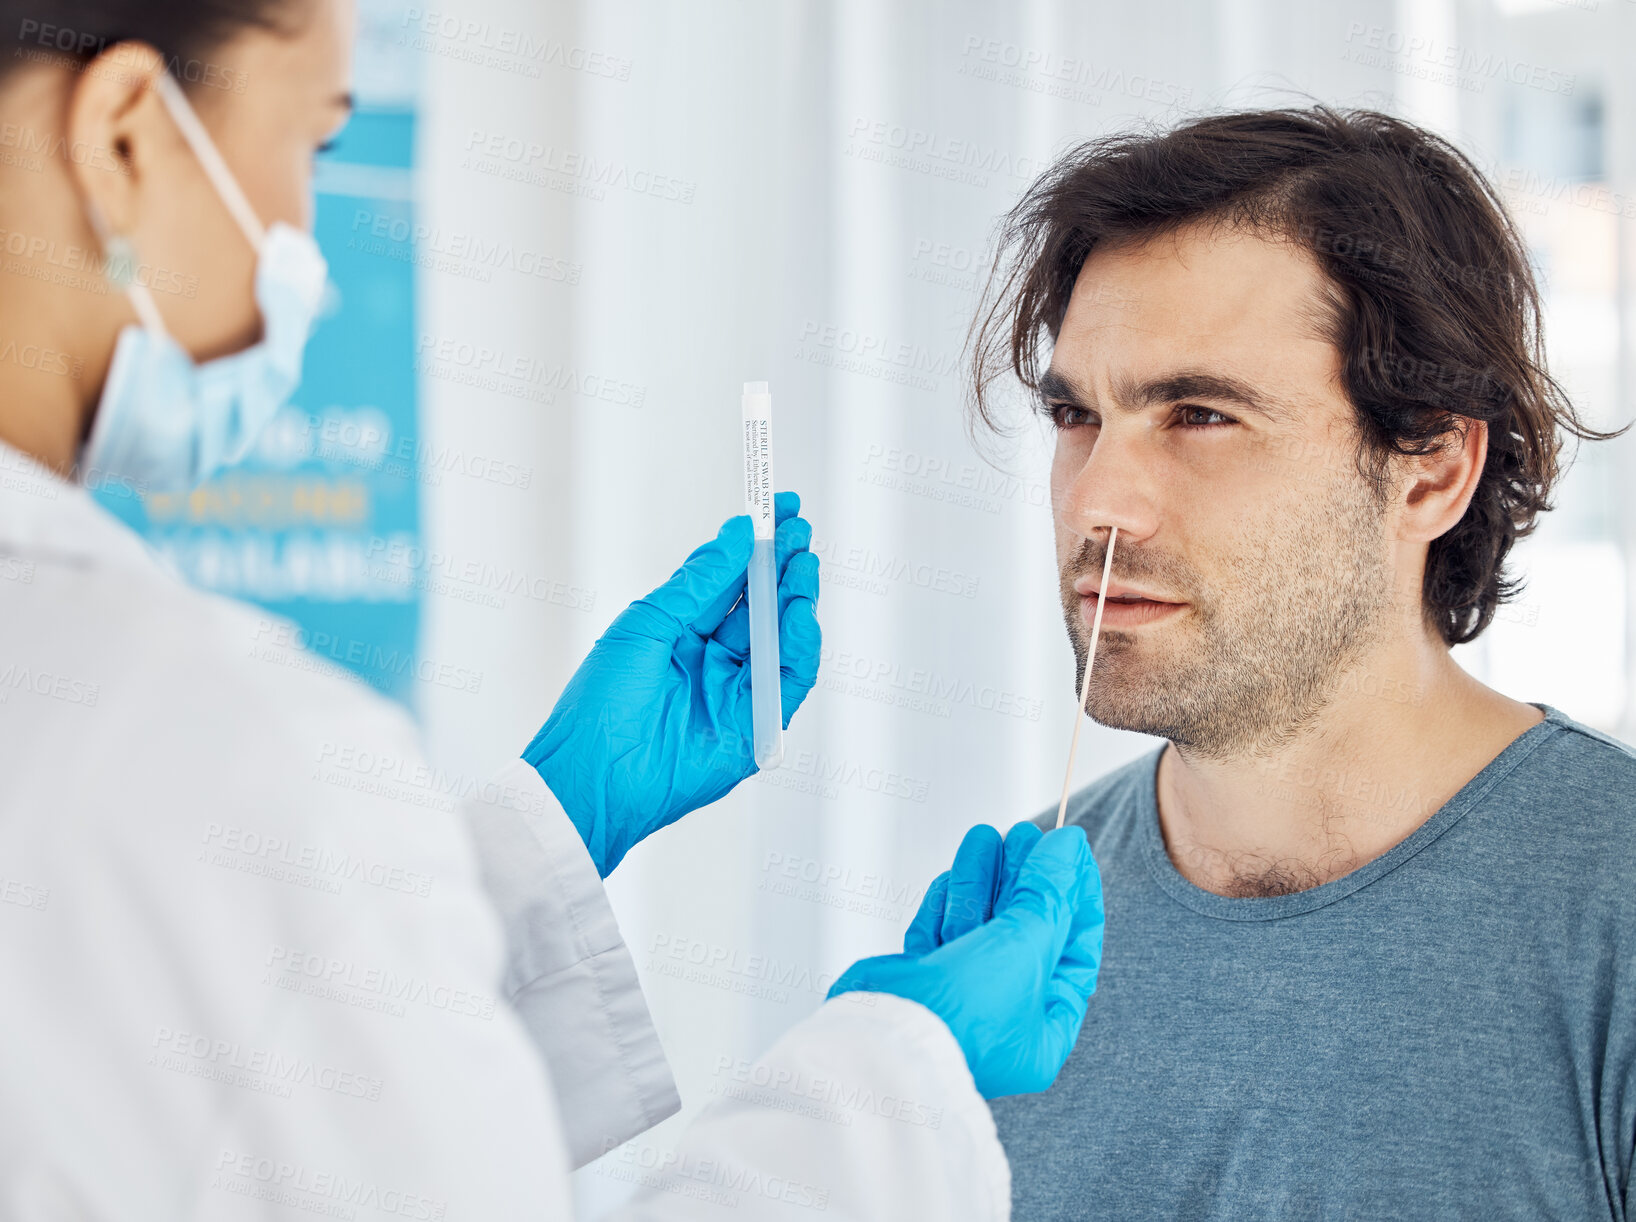 Buy stock photo Covid test, patient and nose swab of a doctor pcr test a man for corona in a hospital or clinic. Healthcare, medical and health consultant working to help with coronavirus consulting and nursing